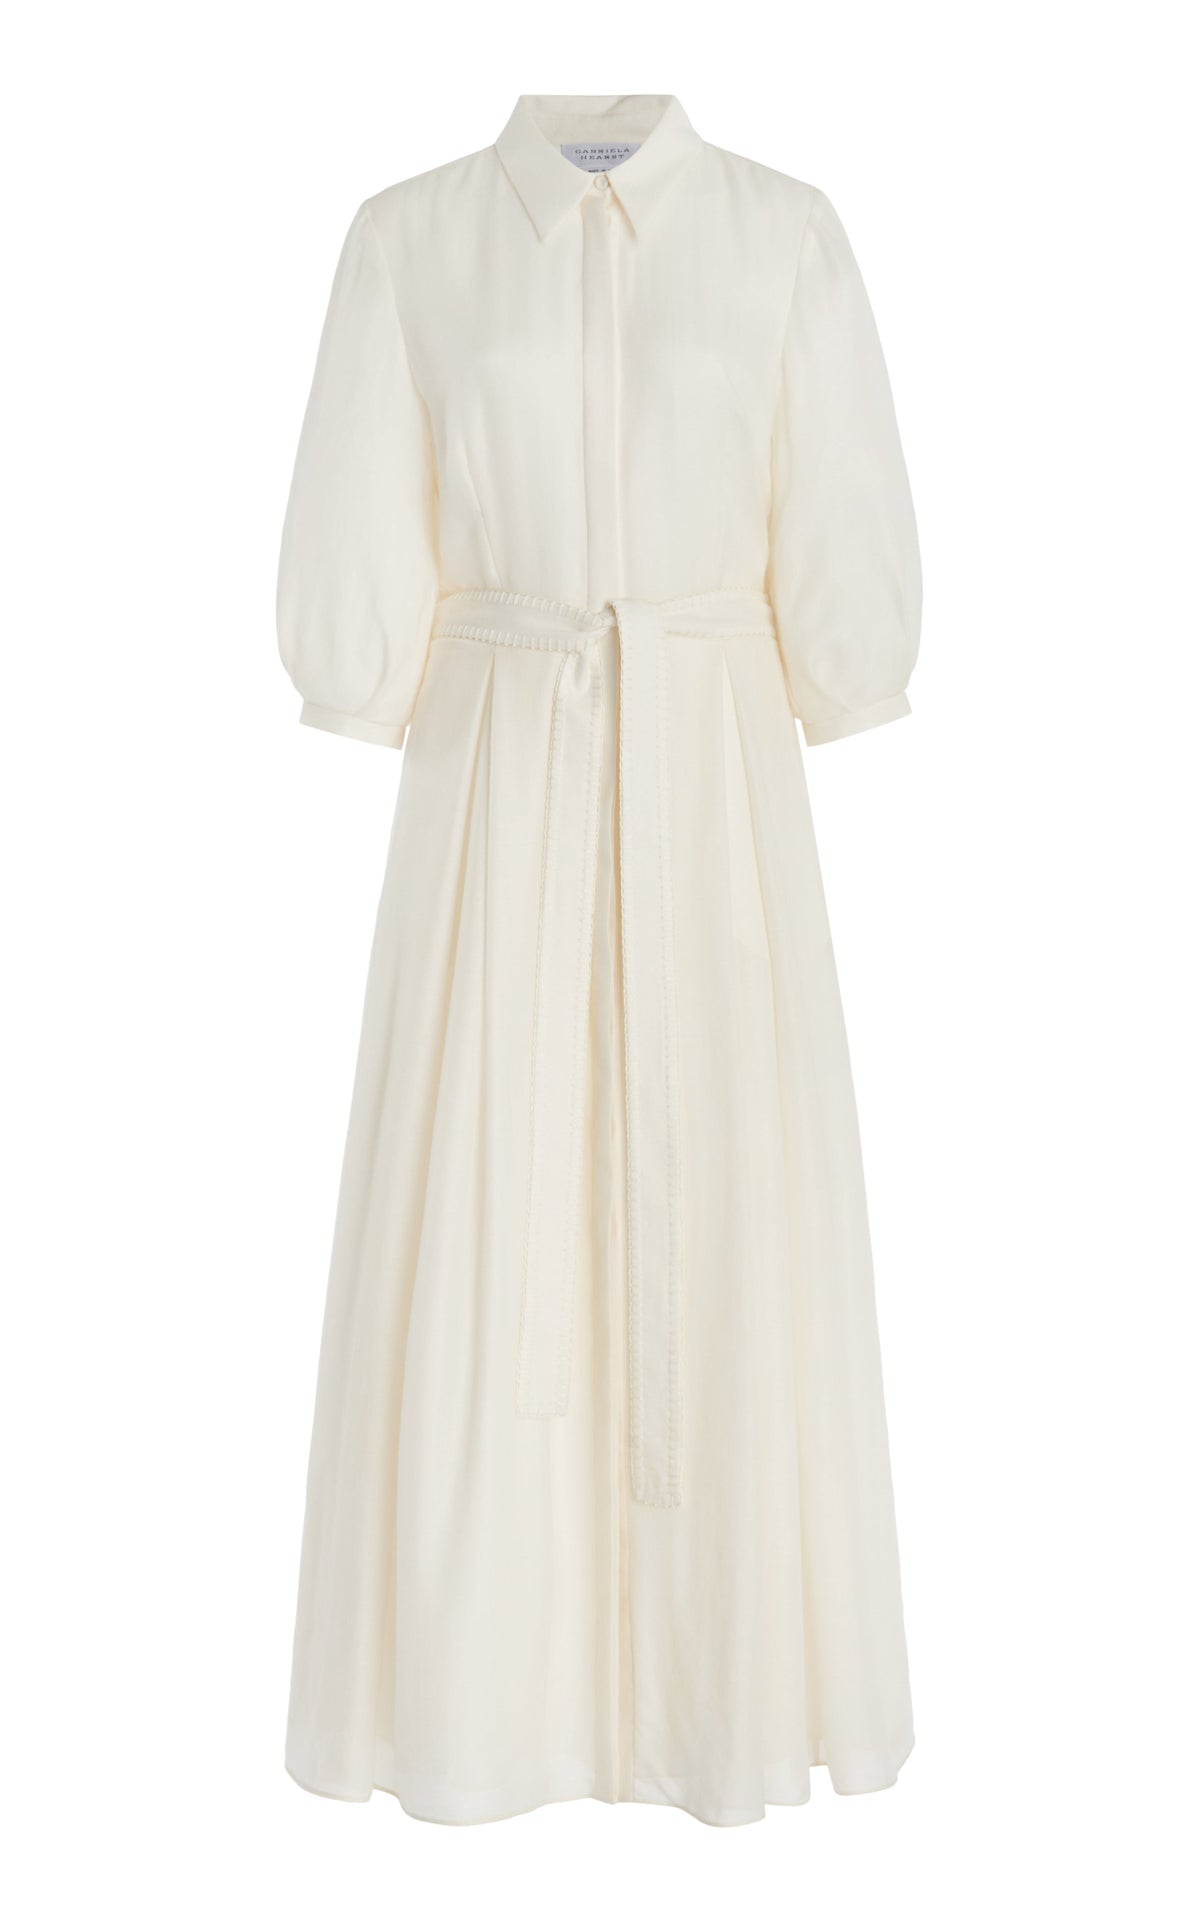 Andy Pleated Dress in Ivory Virgin Wool Cashmere